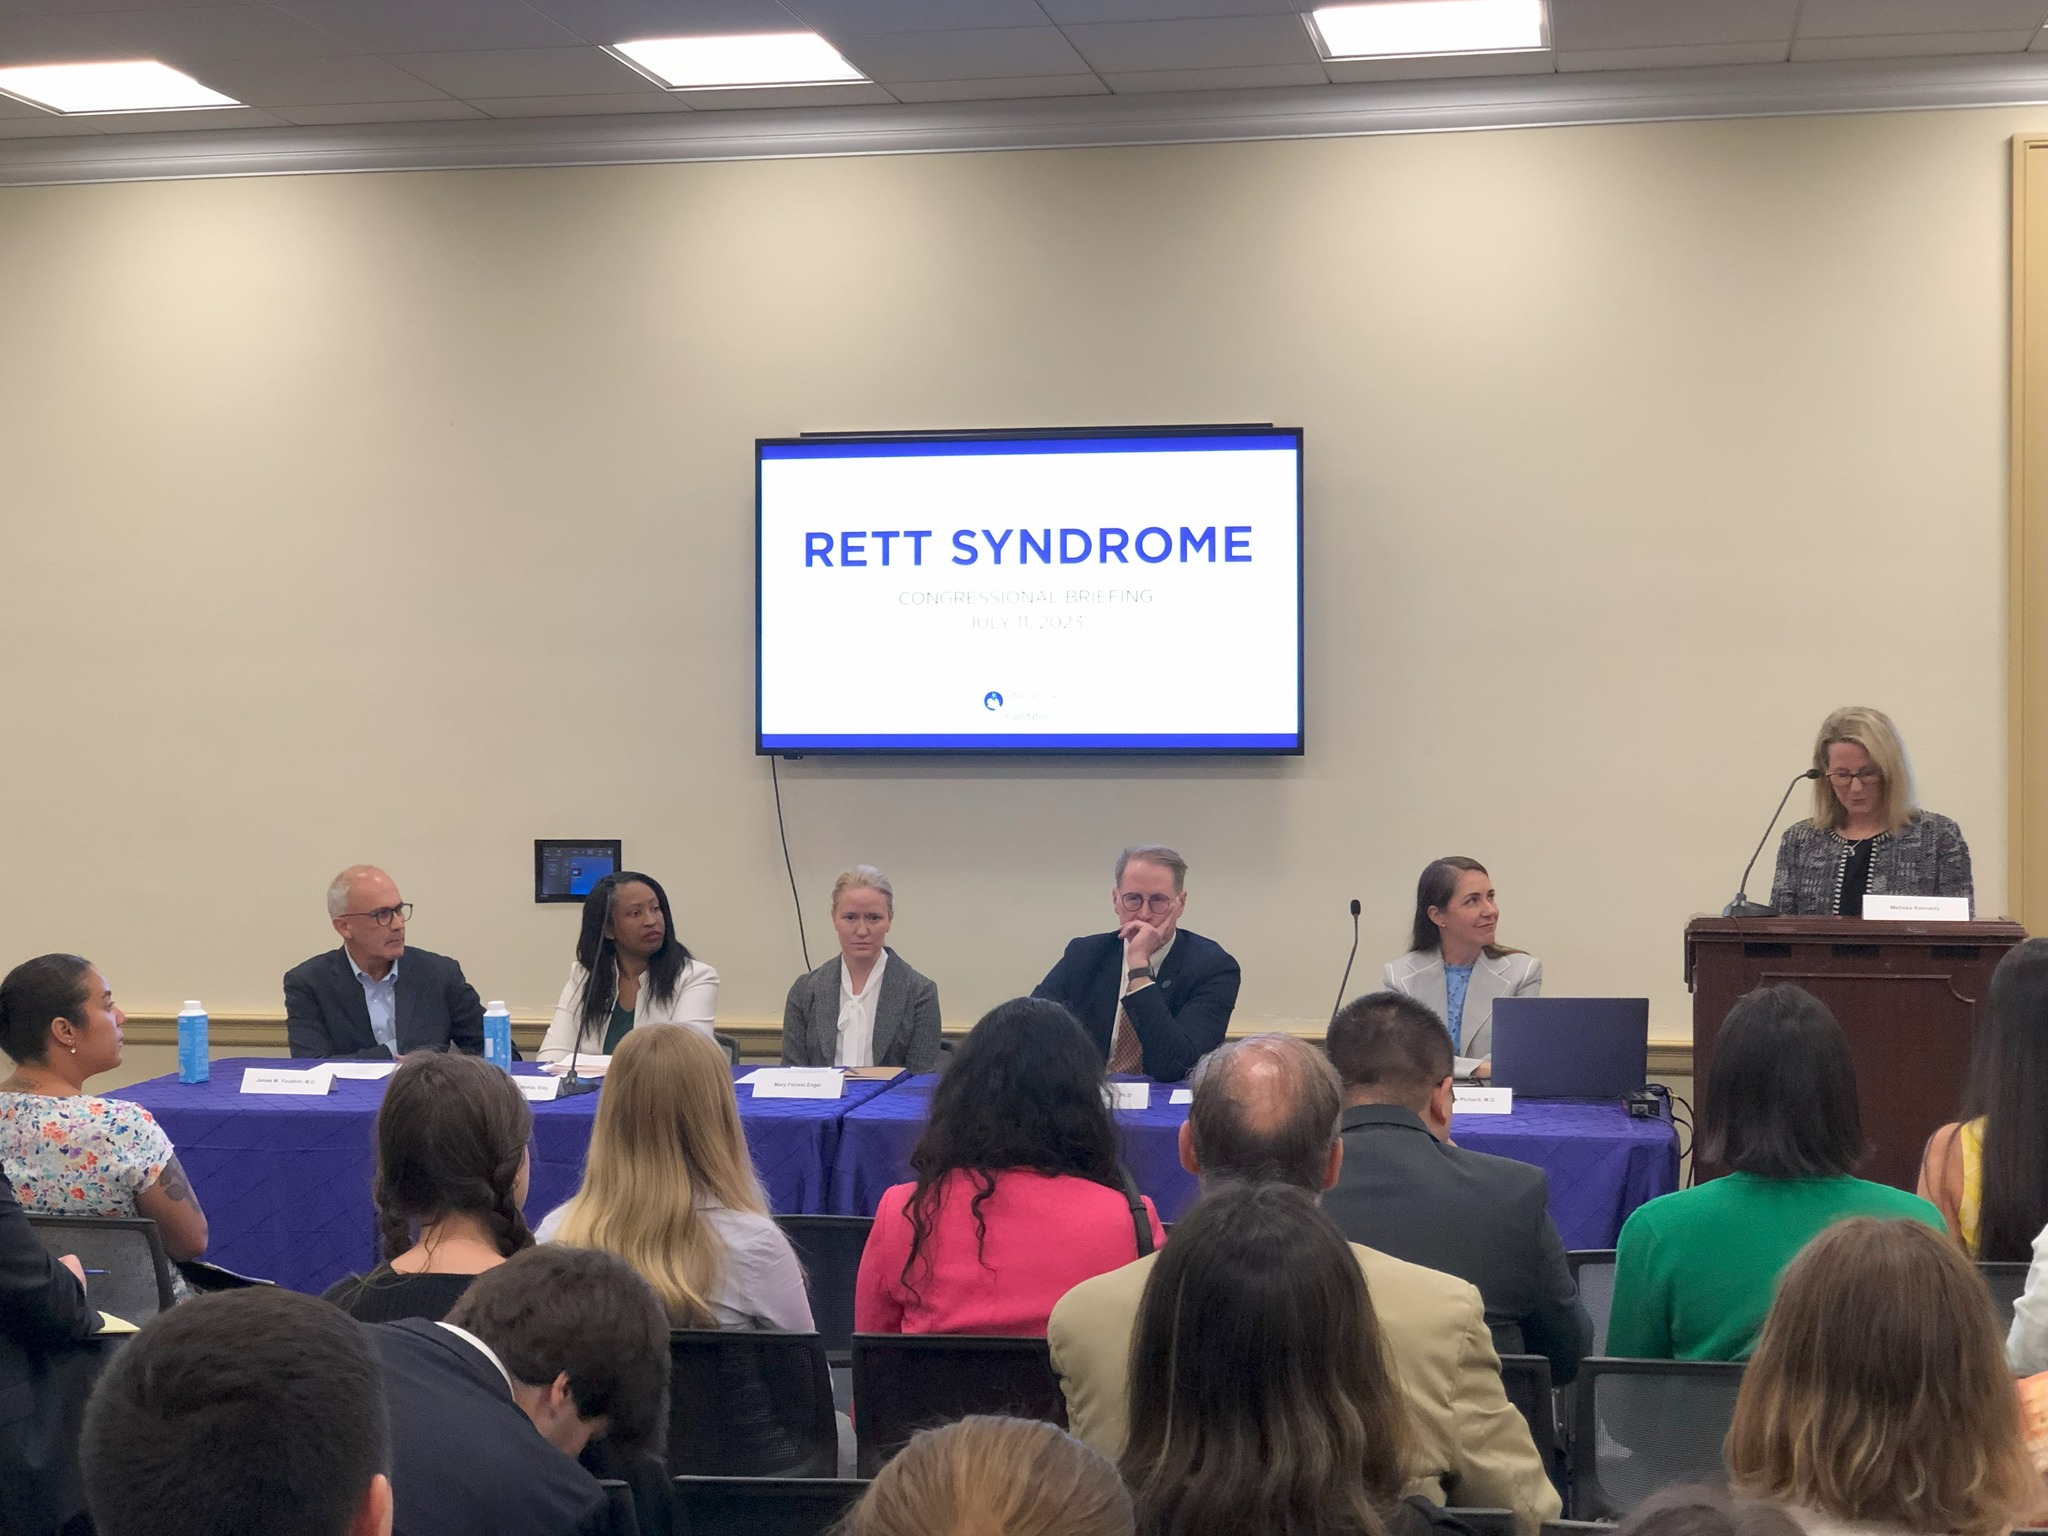 On July 20, representatives of the International Rett Syndrome Foundation headed to Washington, D.C. to advocate for Rett syndrome. 